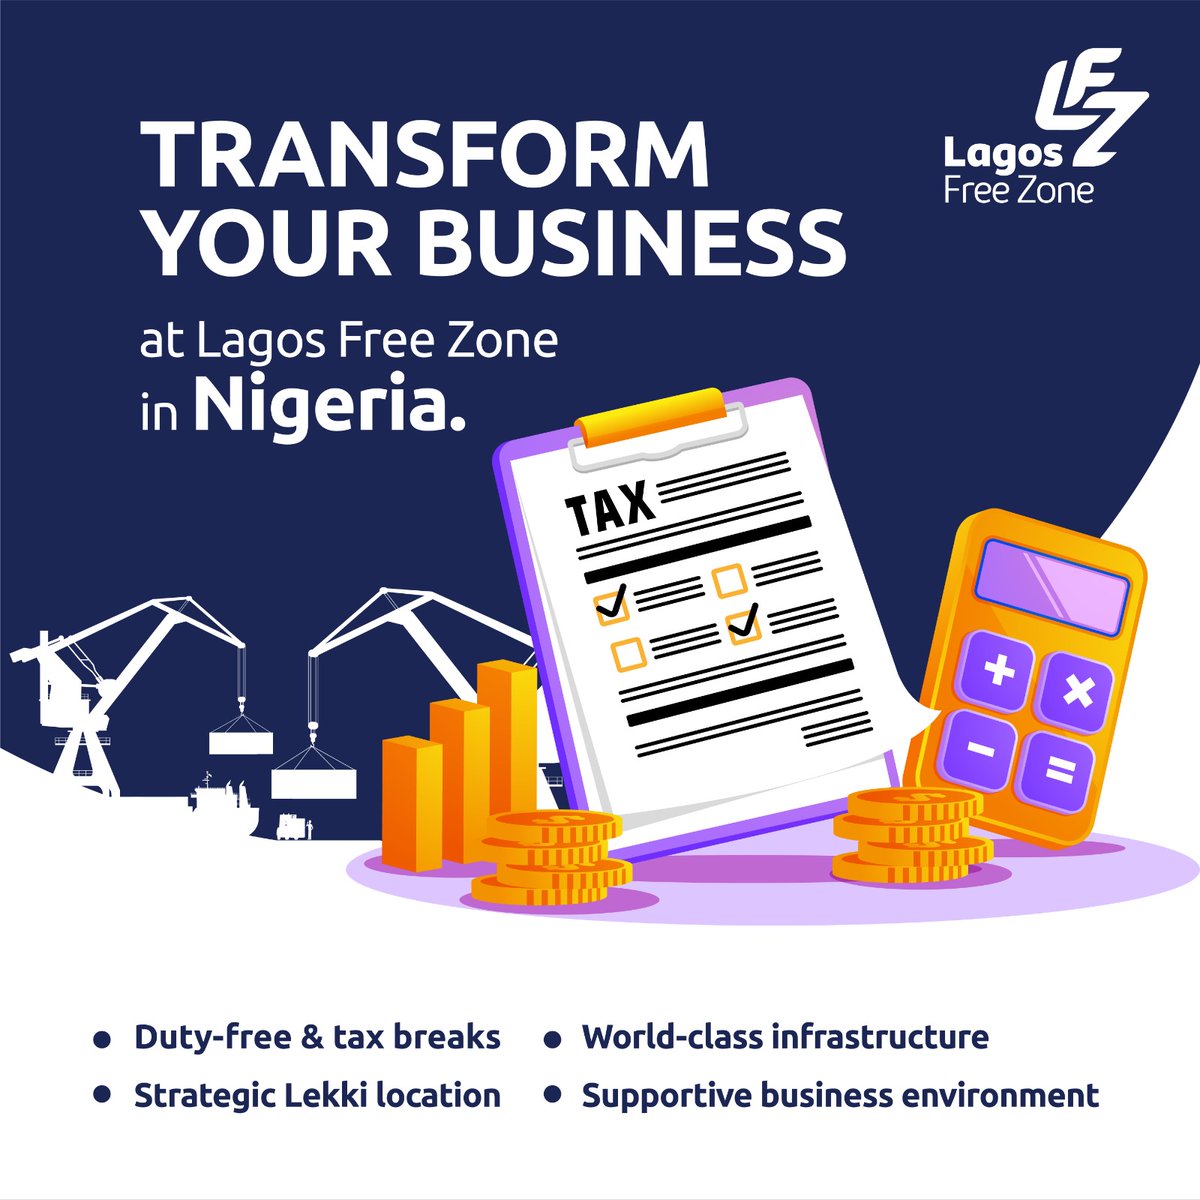 Unlock unparalleled business opportunities at Lagos Free Zone, where abundant resources await to propel your business success. Register today! Contact us to learn more today. #LagosFreeZone #LekkiPort #LekkiFreePortTerminal #TheNewFrontier #Nigeria #Lagos